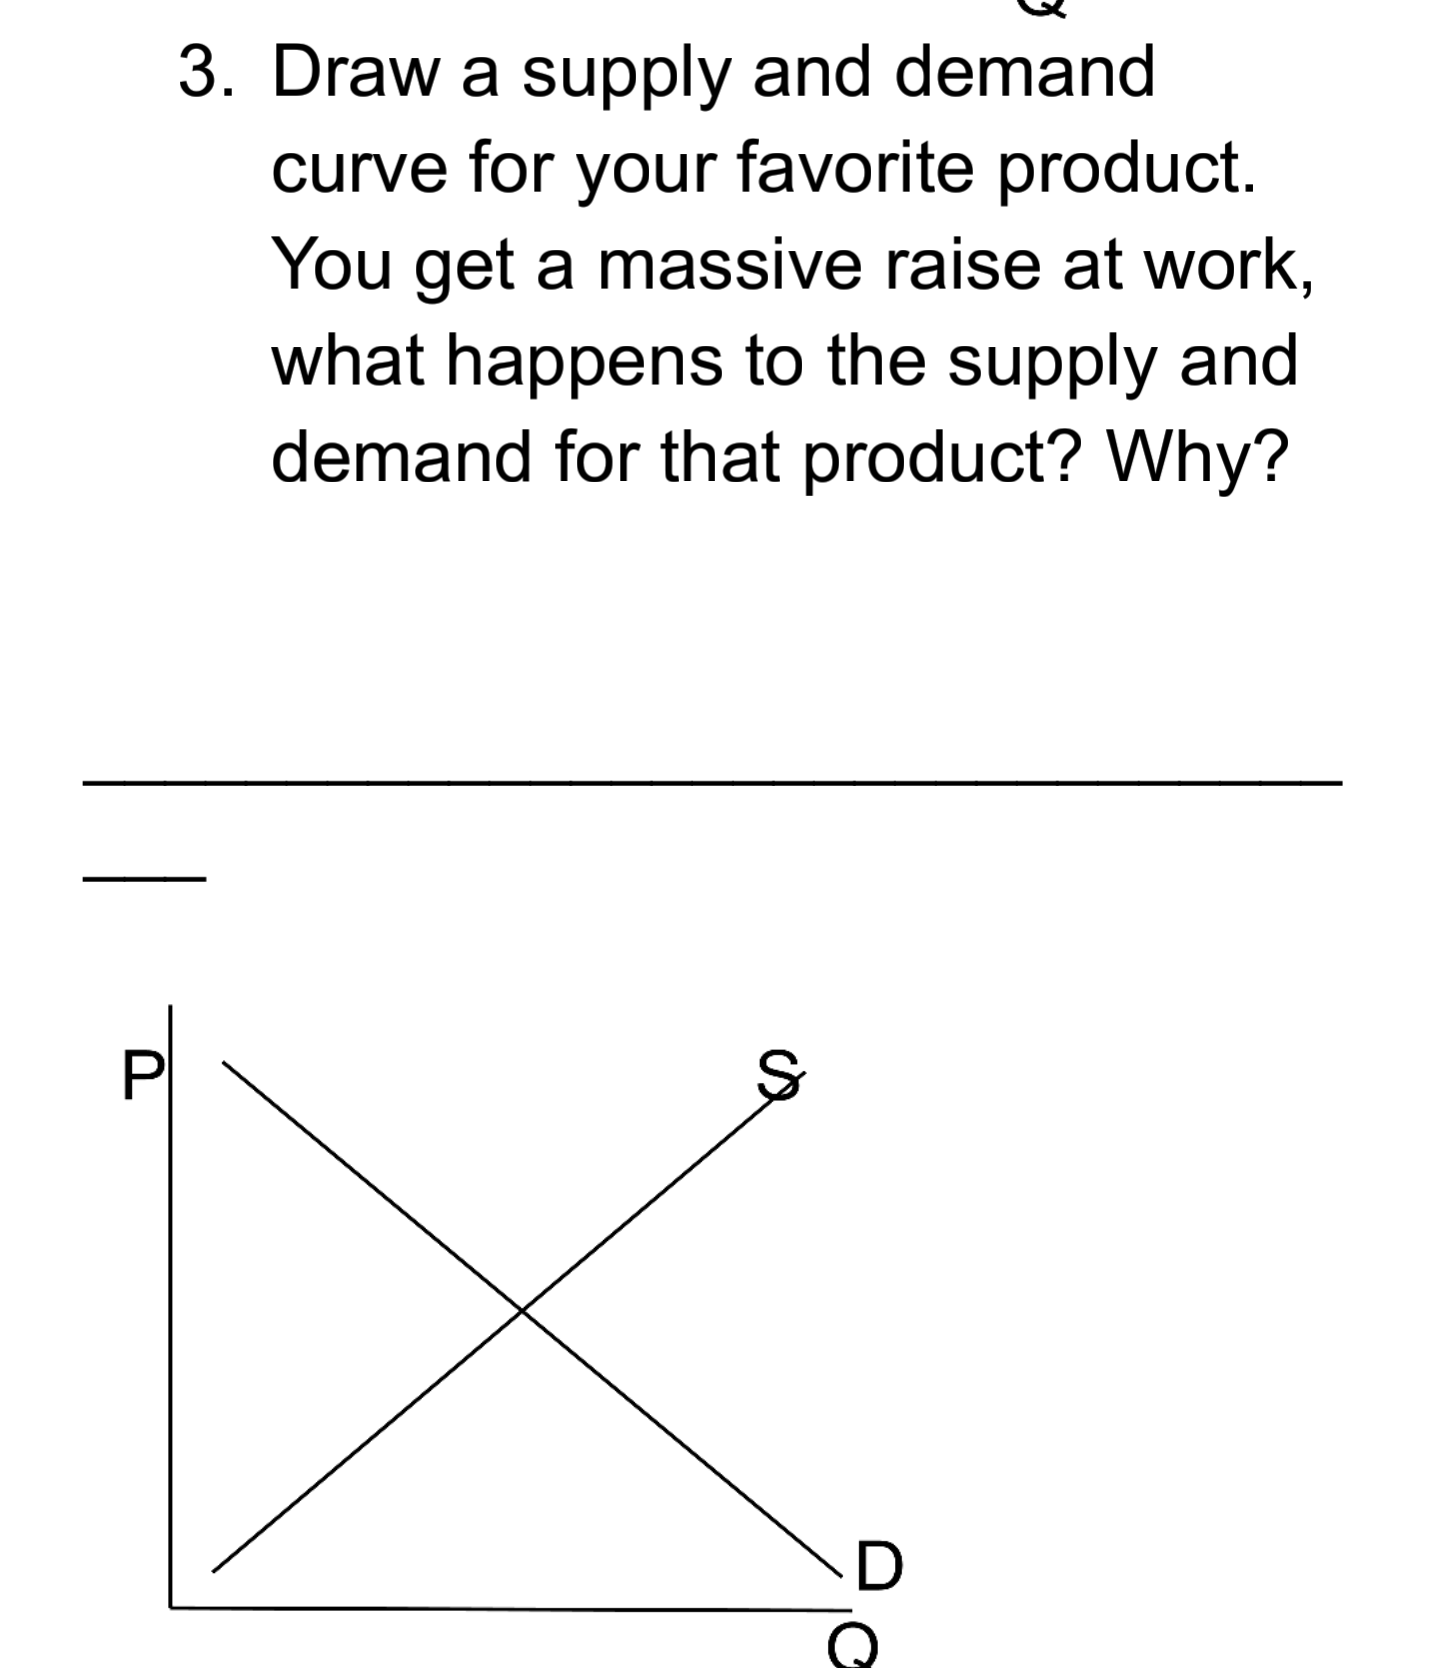 Draw a supply and demand
curve for your favorite product.
You get a massive raise at work,
what happens to the supply and
demand for that product? Why?
